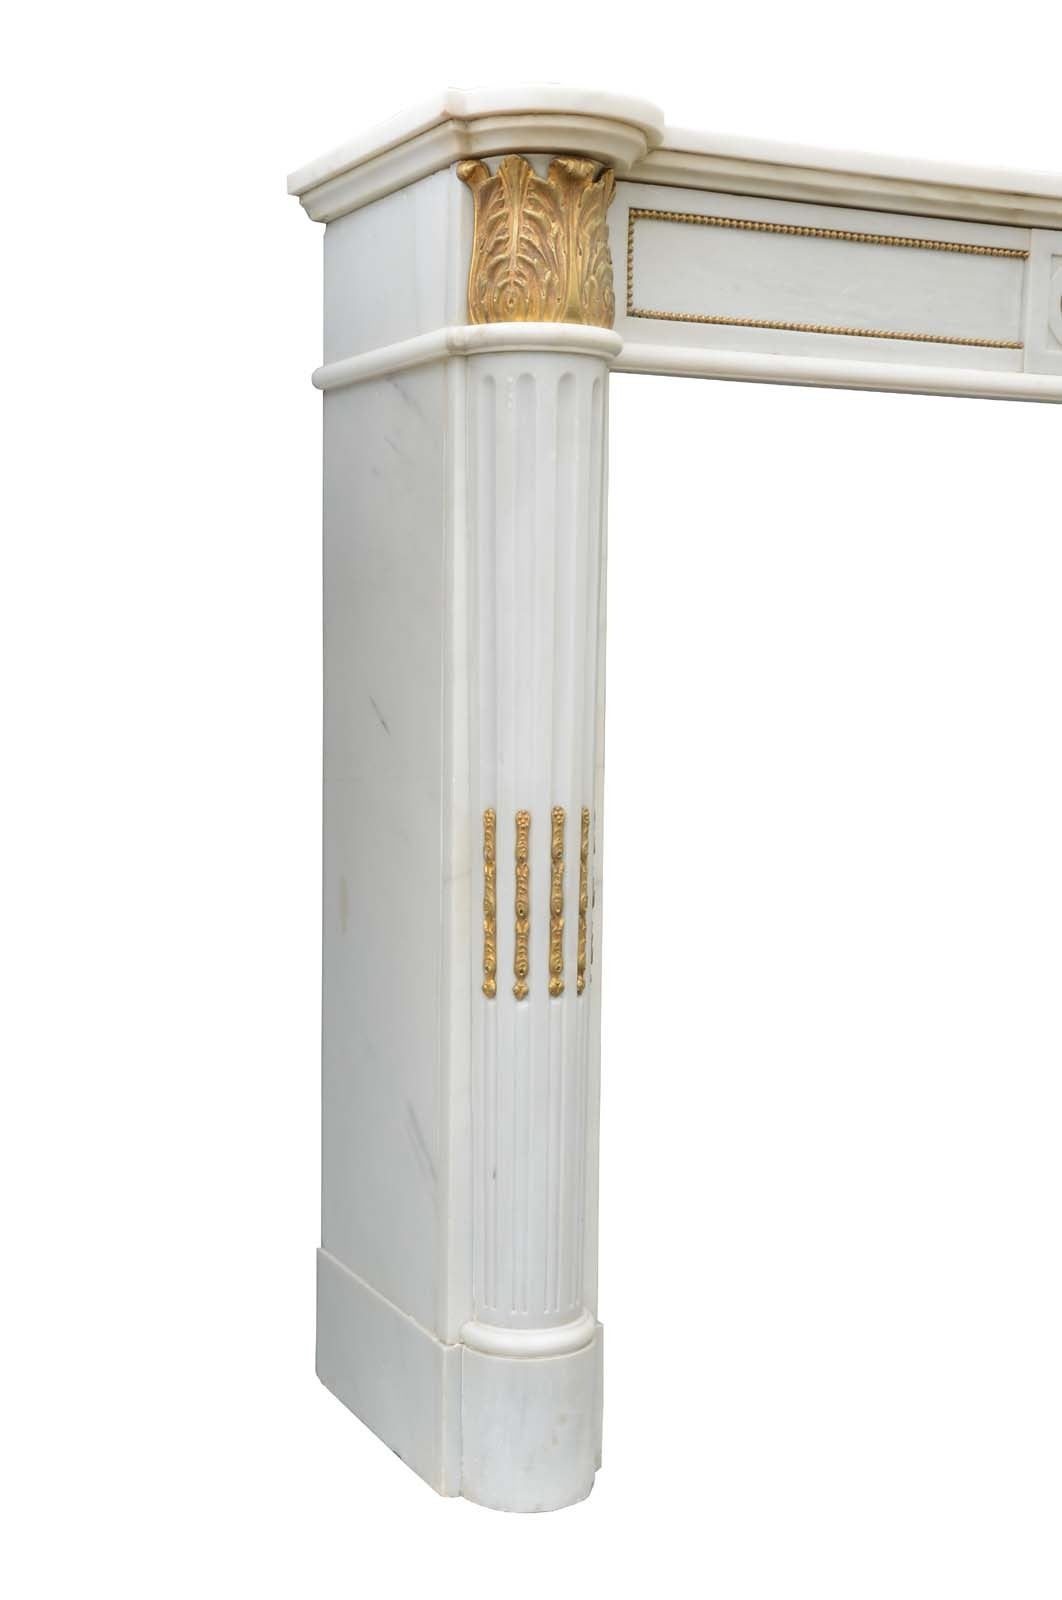 French Louis XVI style white marble and gilded bronze fireplace dated late 19th century. Dimensions: Opening: 35 x 44 in.